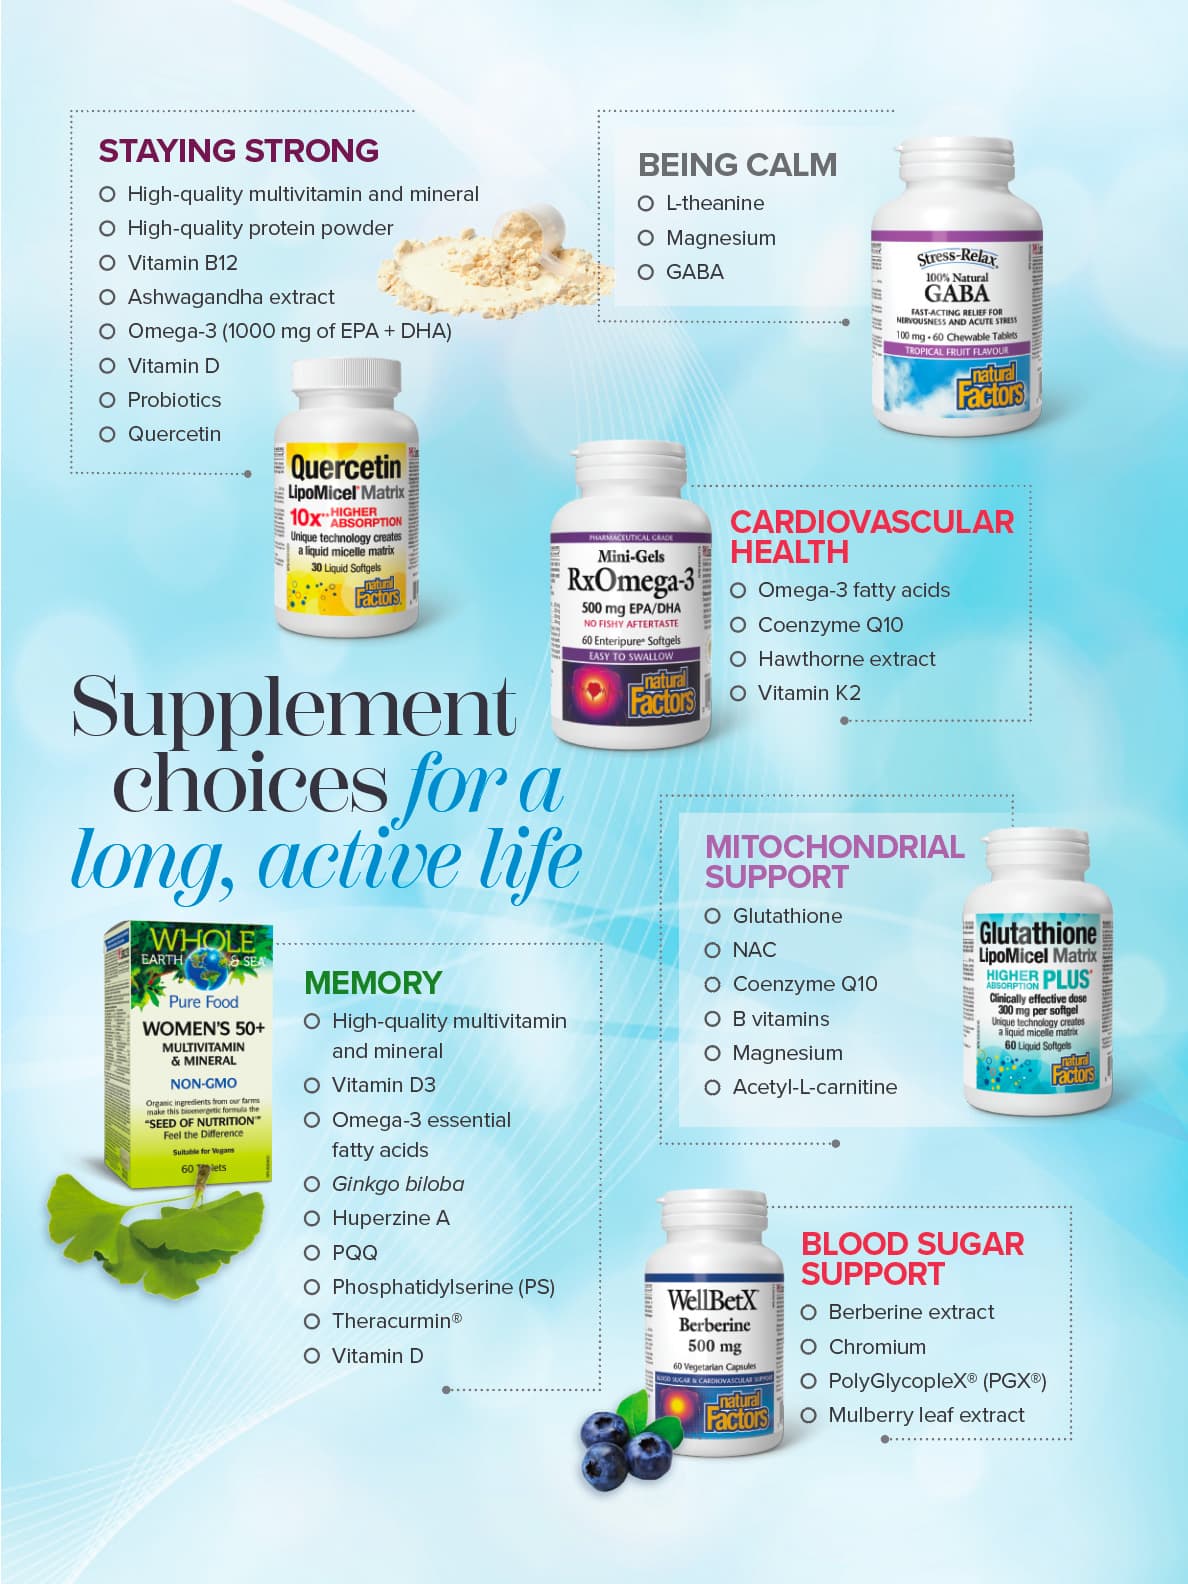 Supplement choices for a long, active life.